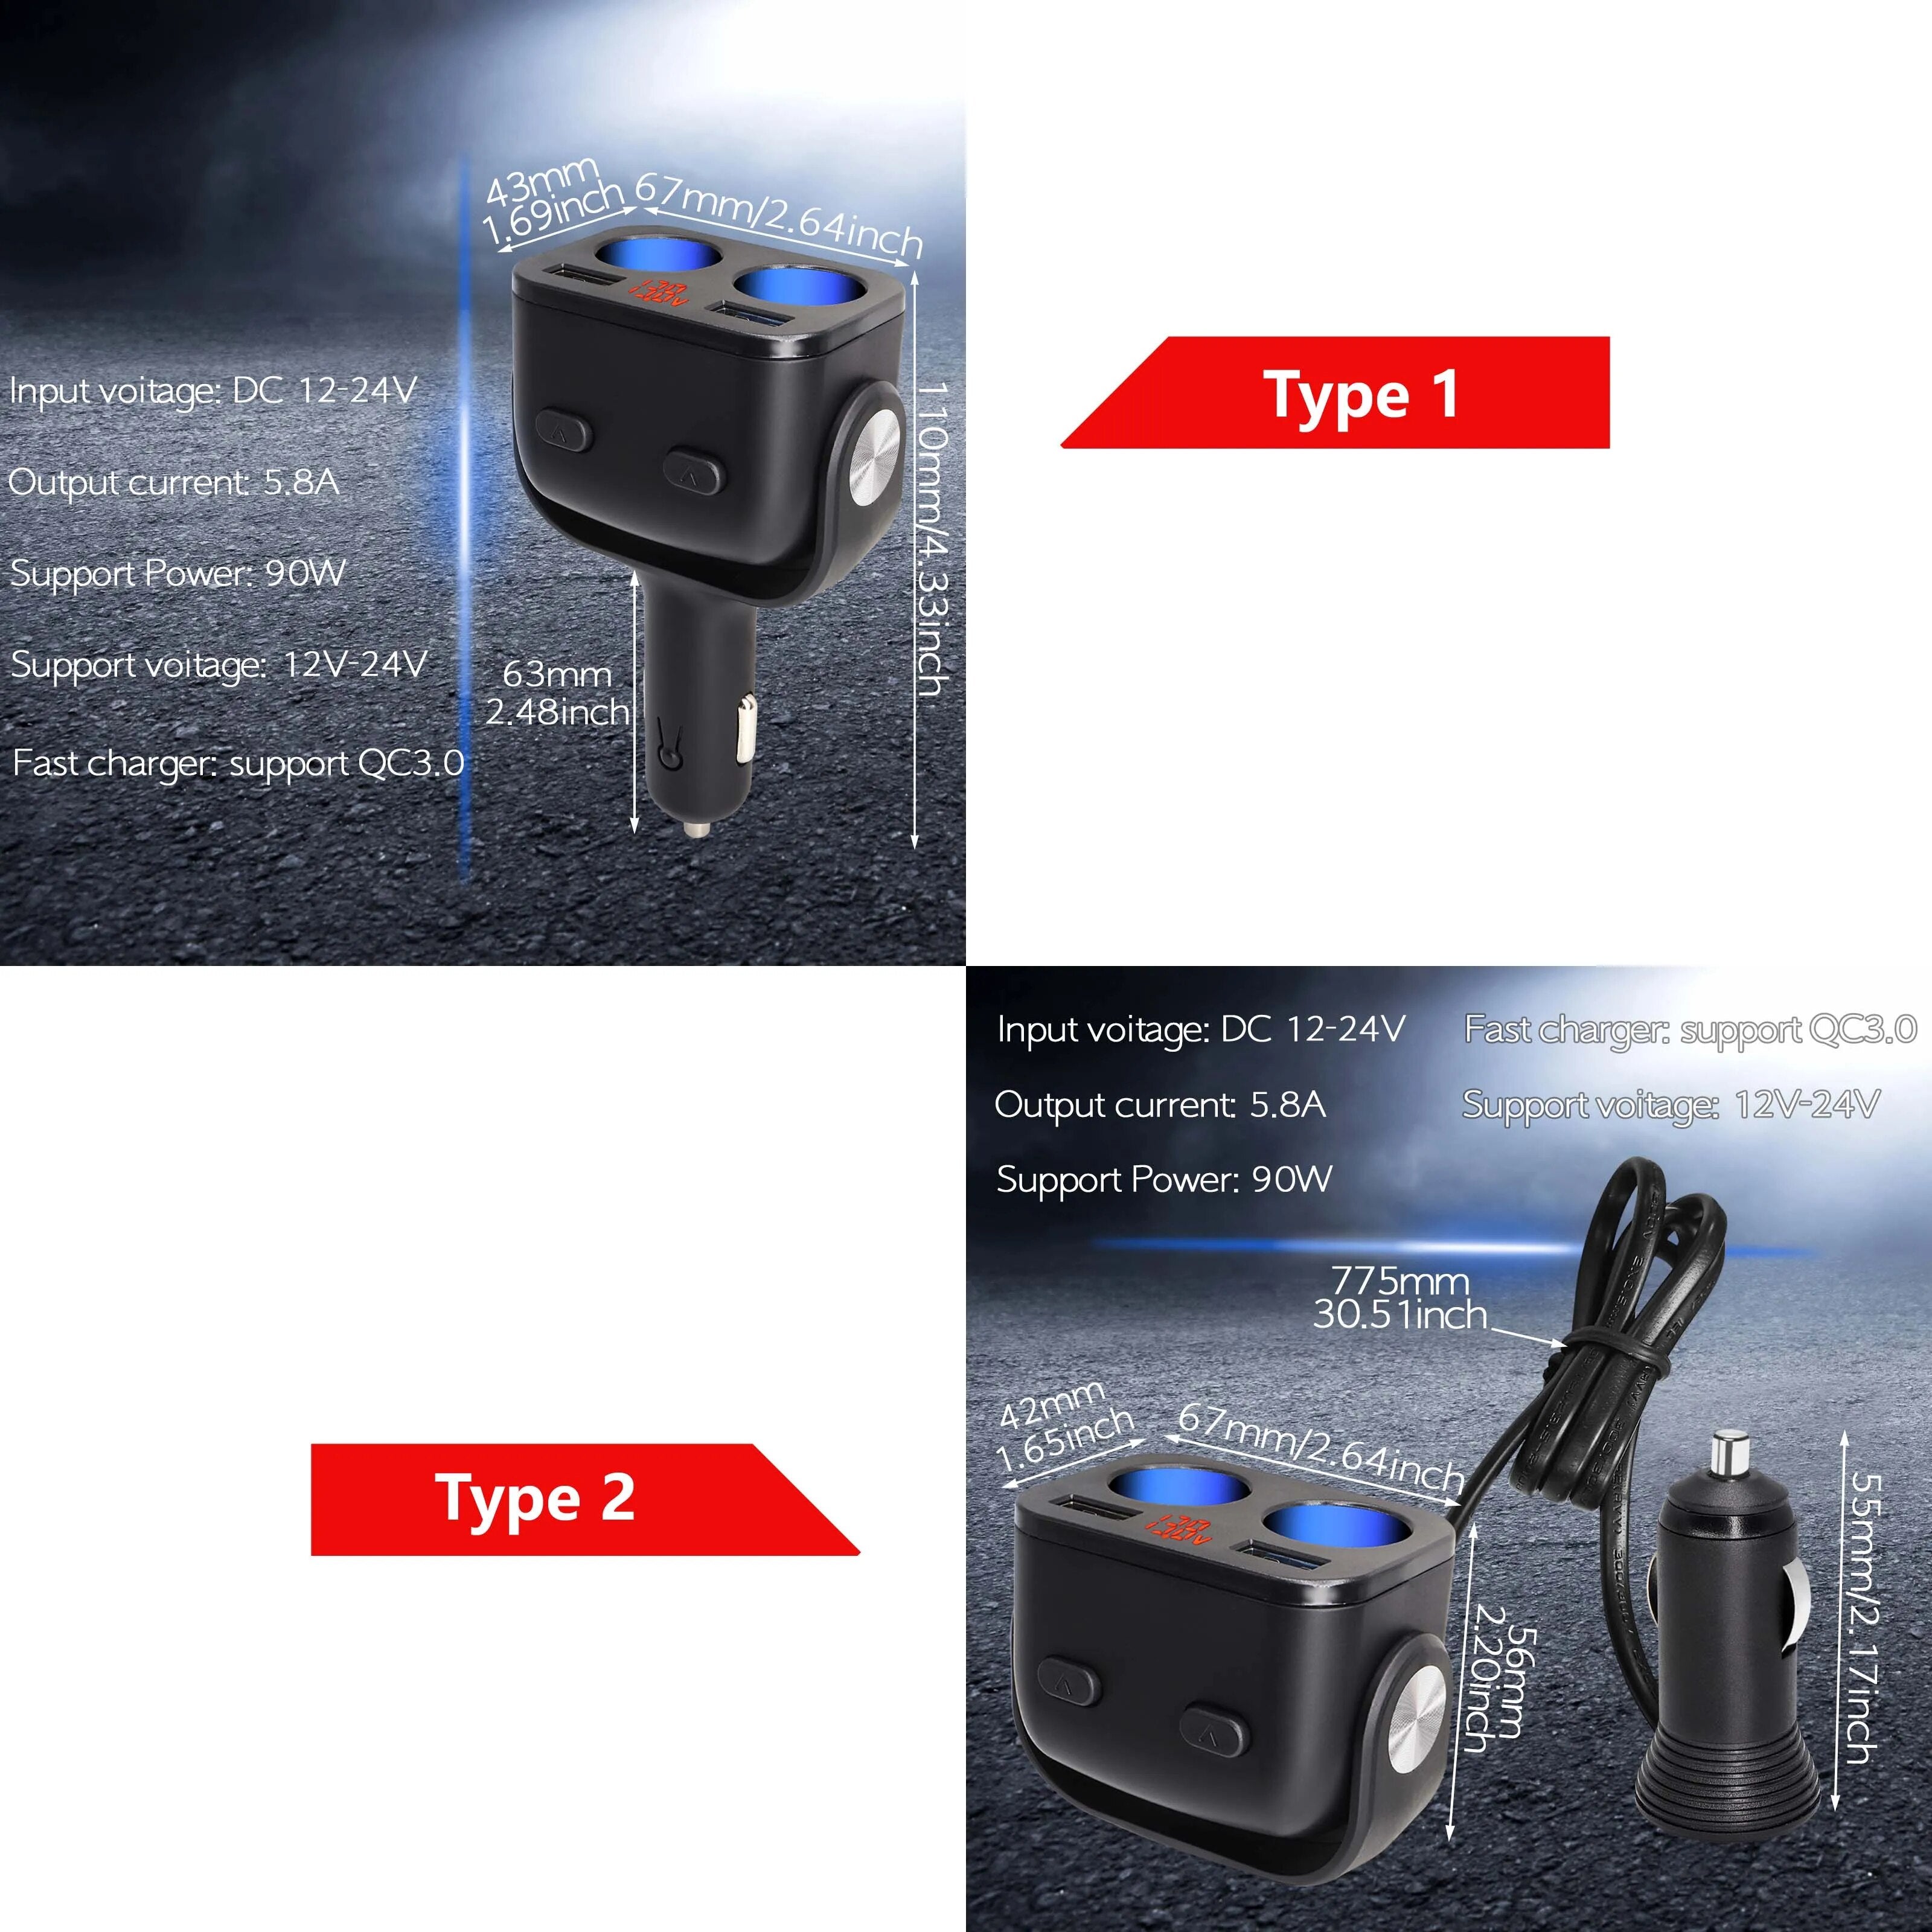 Car Cigarette Lighter Socket Extension Cord Cable USB QC3.0 Quick Charge Power Adapter Plug Phone ipad Charger Splitter Outlet